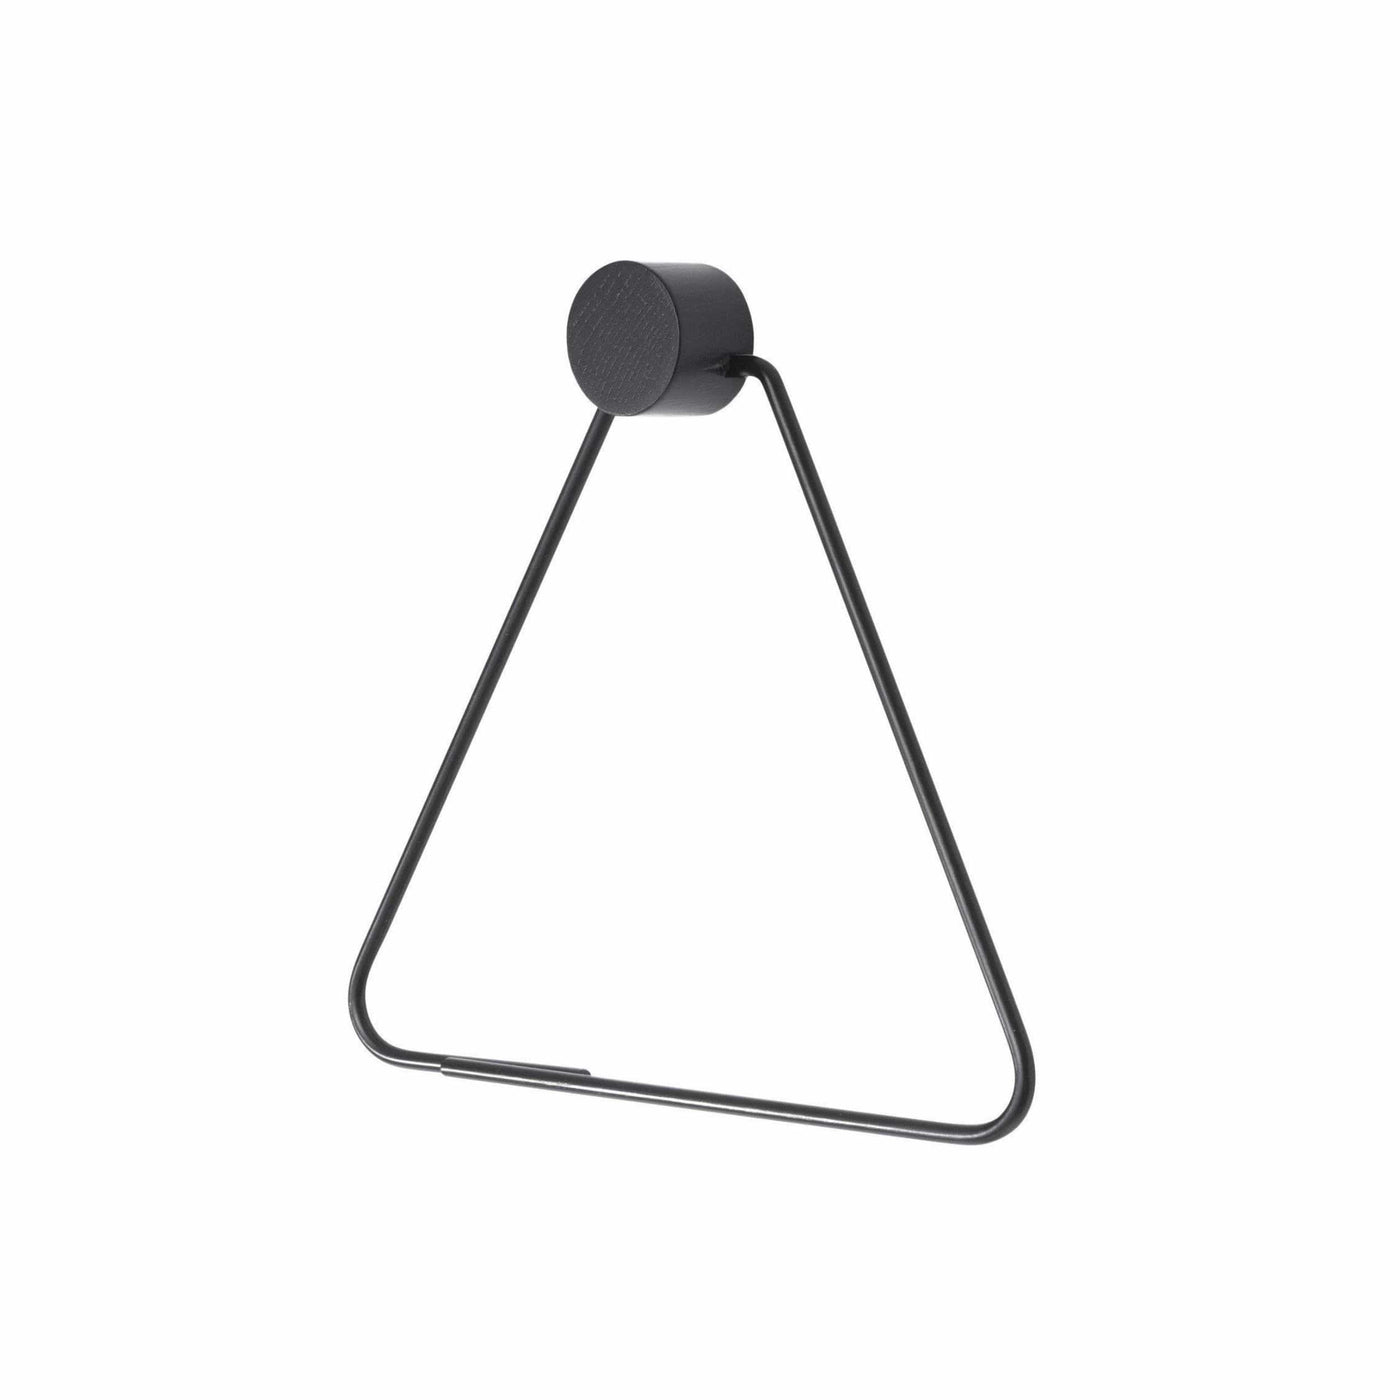 black toilet paper holder by Ferm Living, from side angle. Buy now at someday desigs